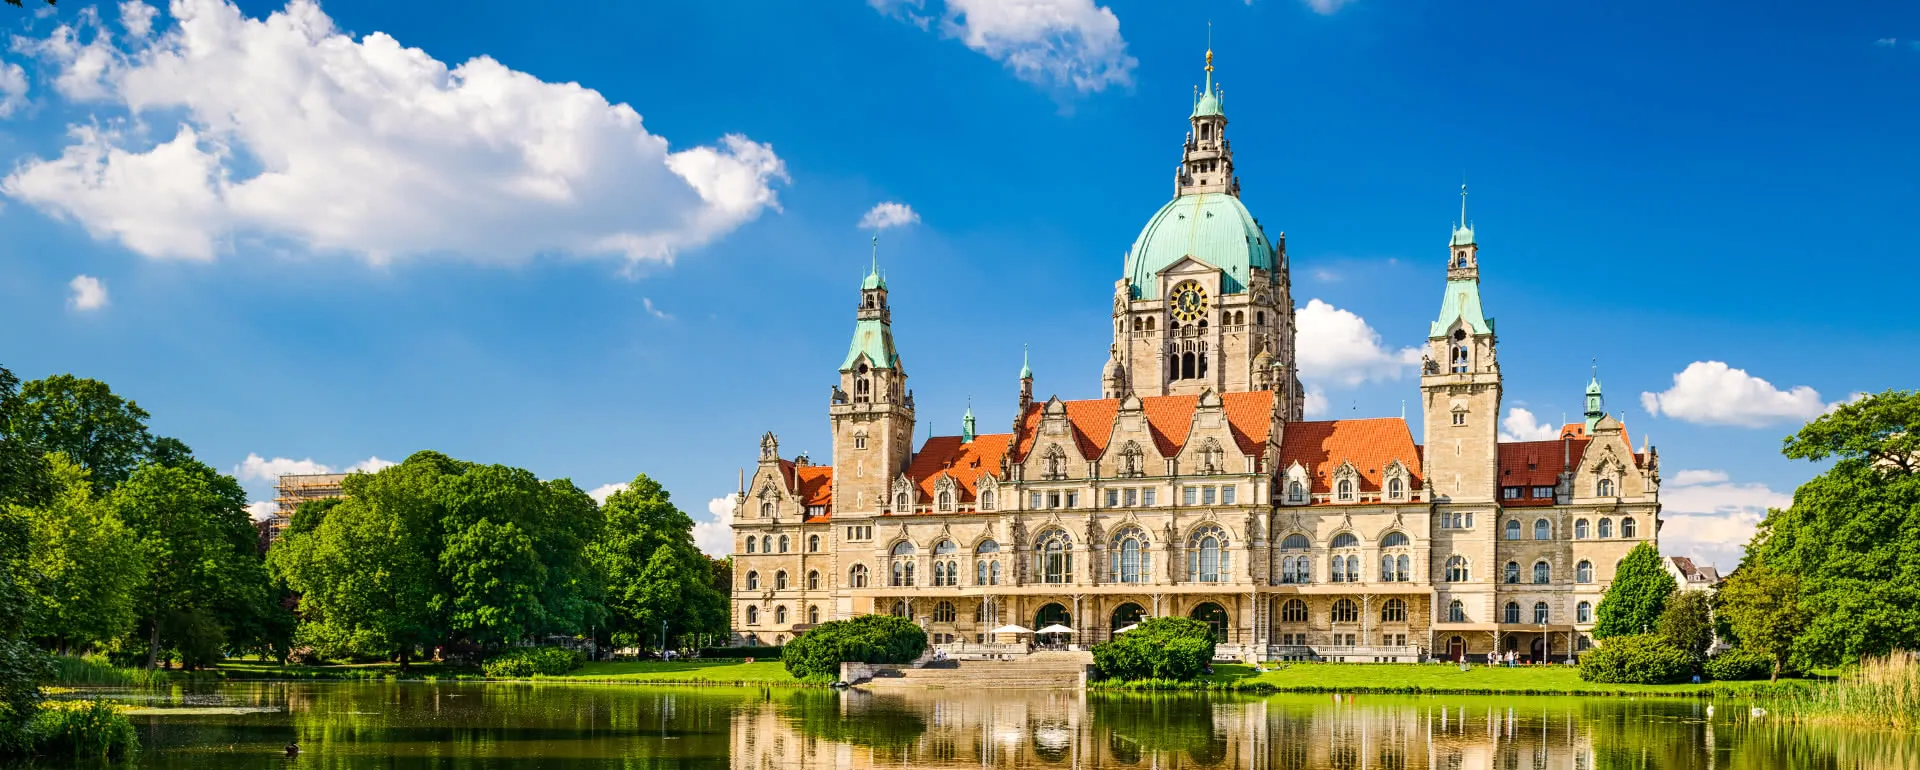 Hannover - the destination with youth hostels